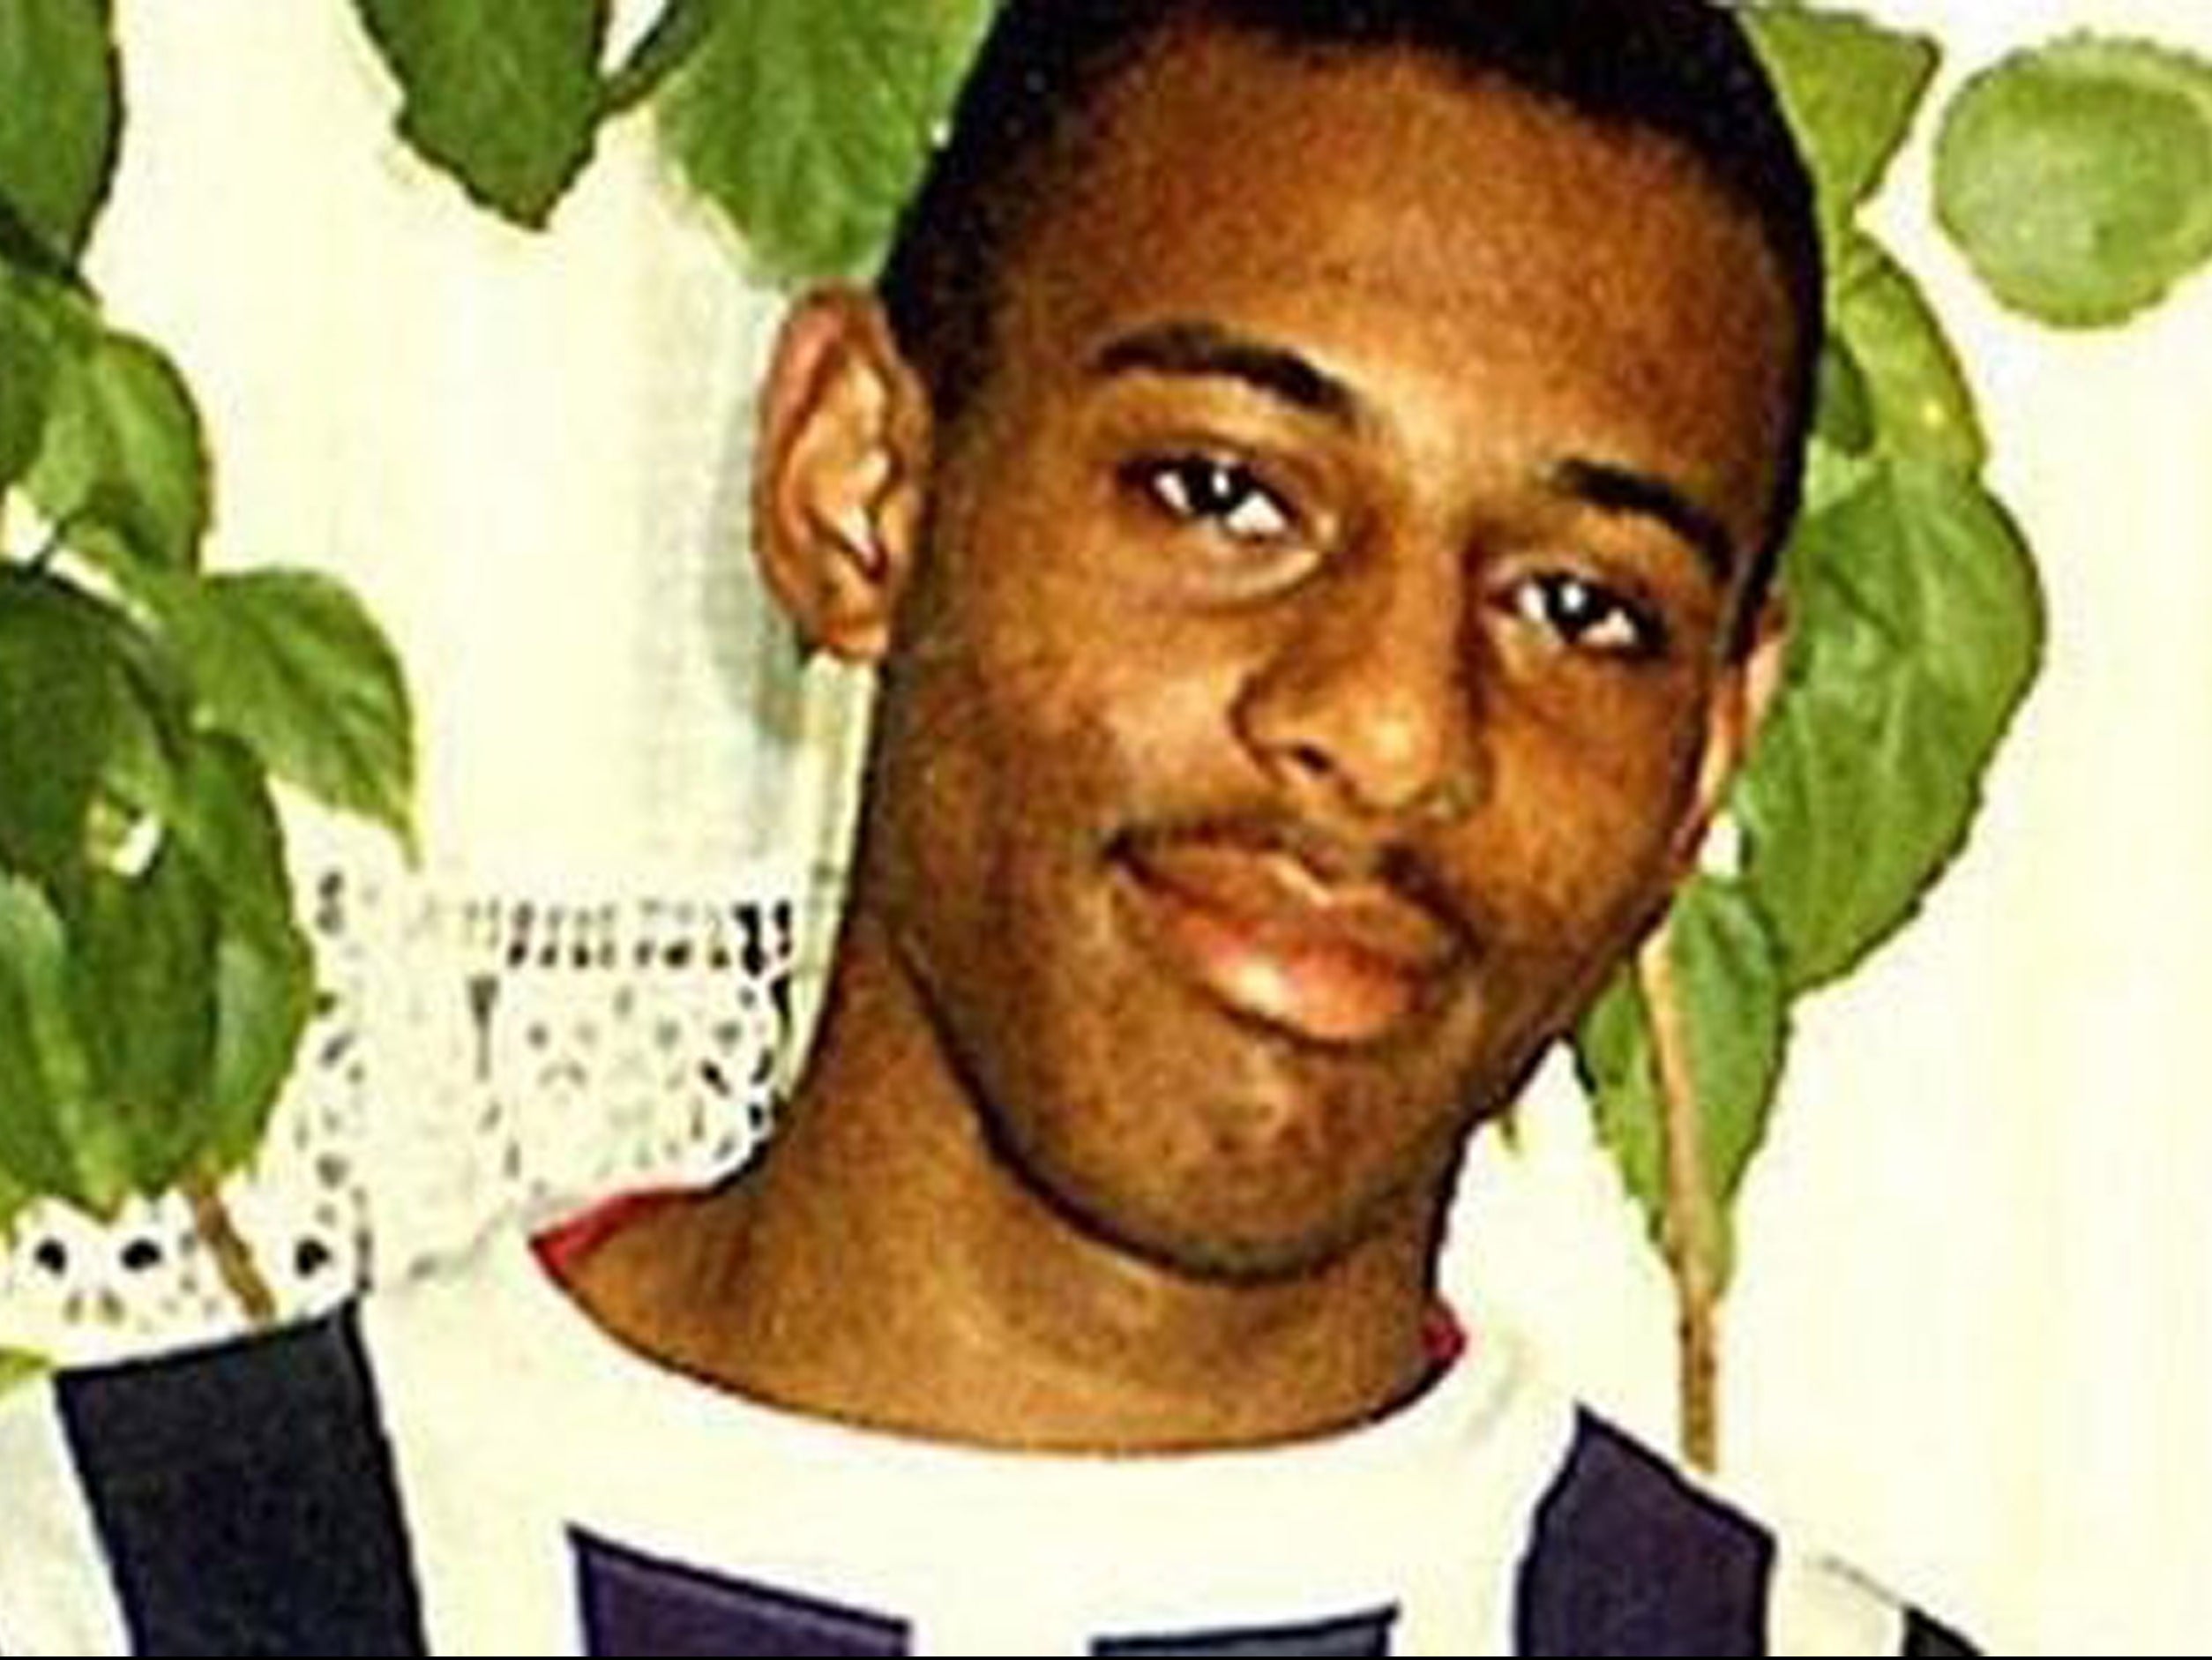 A photo of the real Stephen Lawrence, handed out by the Metropolitan Police